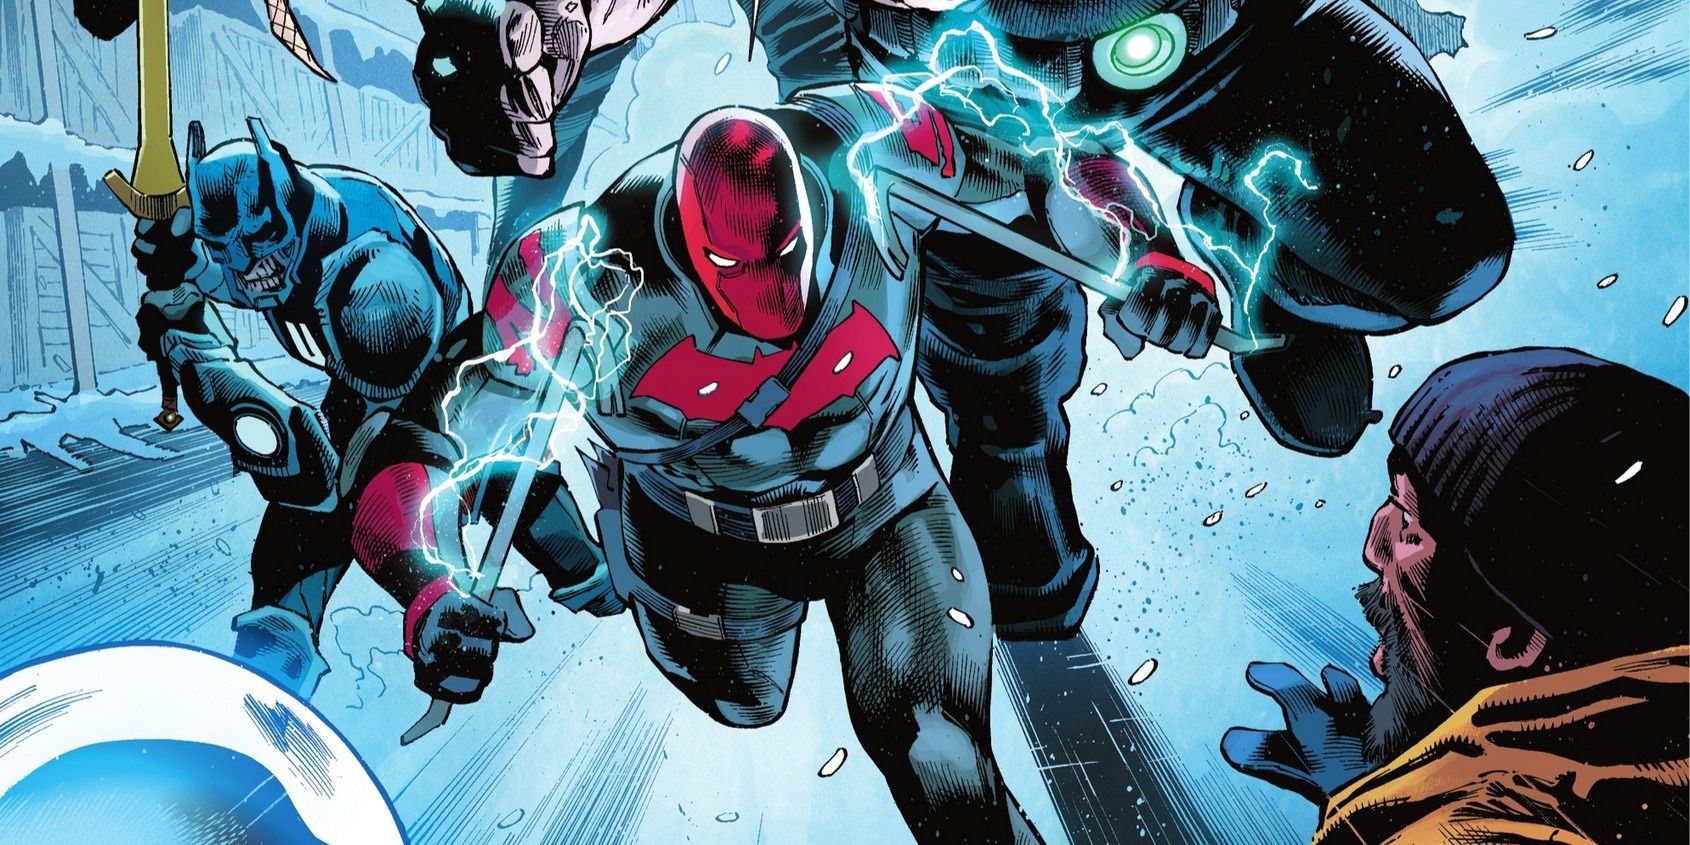 Red Hood Stole the Coolest Part of His New Weapons from Nightwing